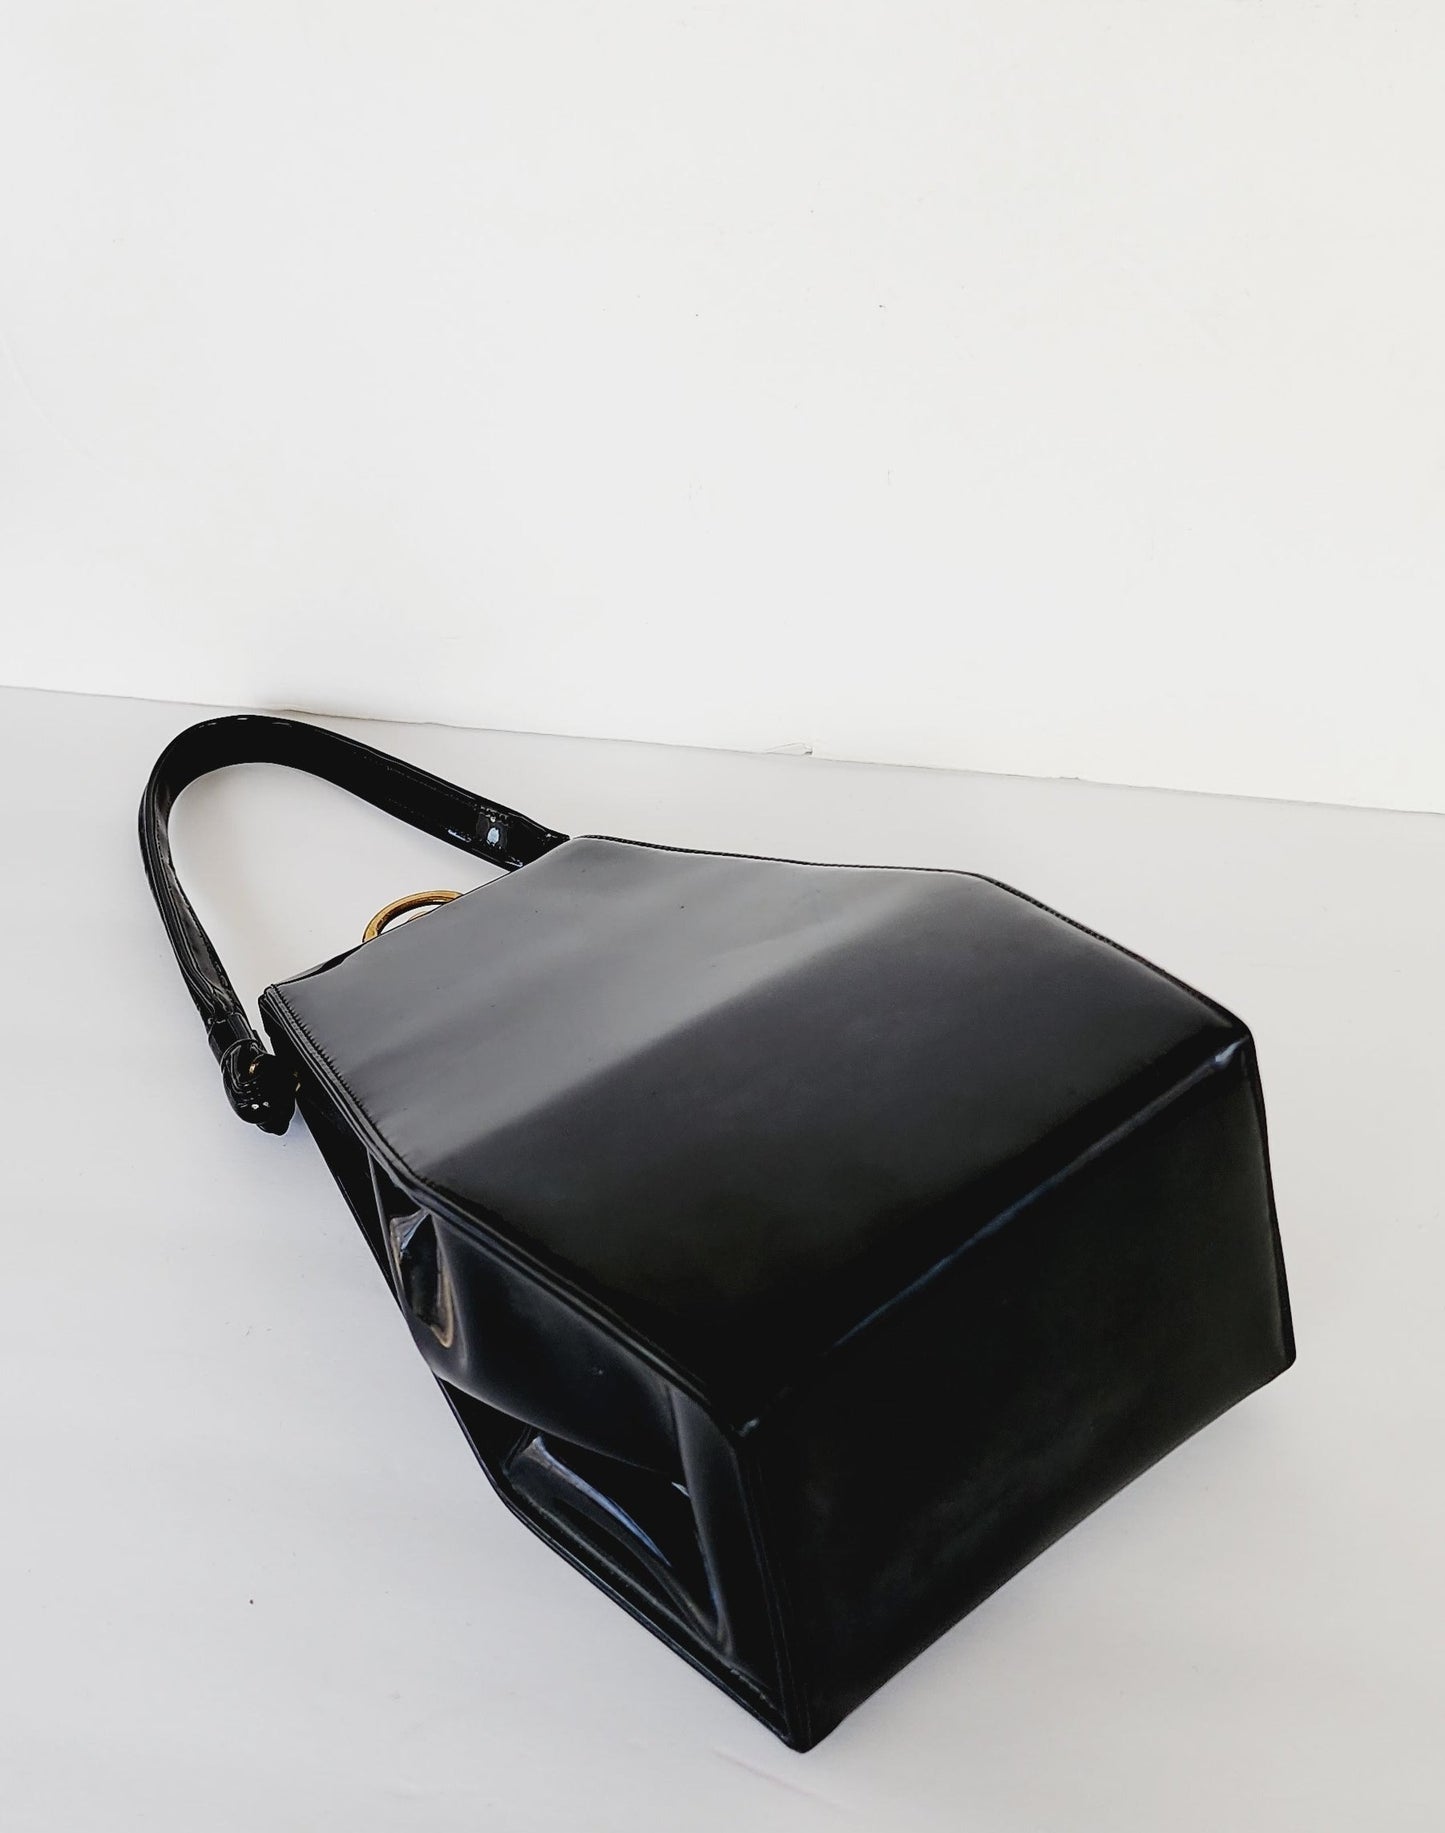 50s Black Patent Leather Bag with Top Handle / Oblong Geometric MCM Modernist Style by Lewis